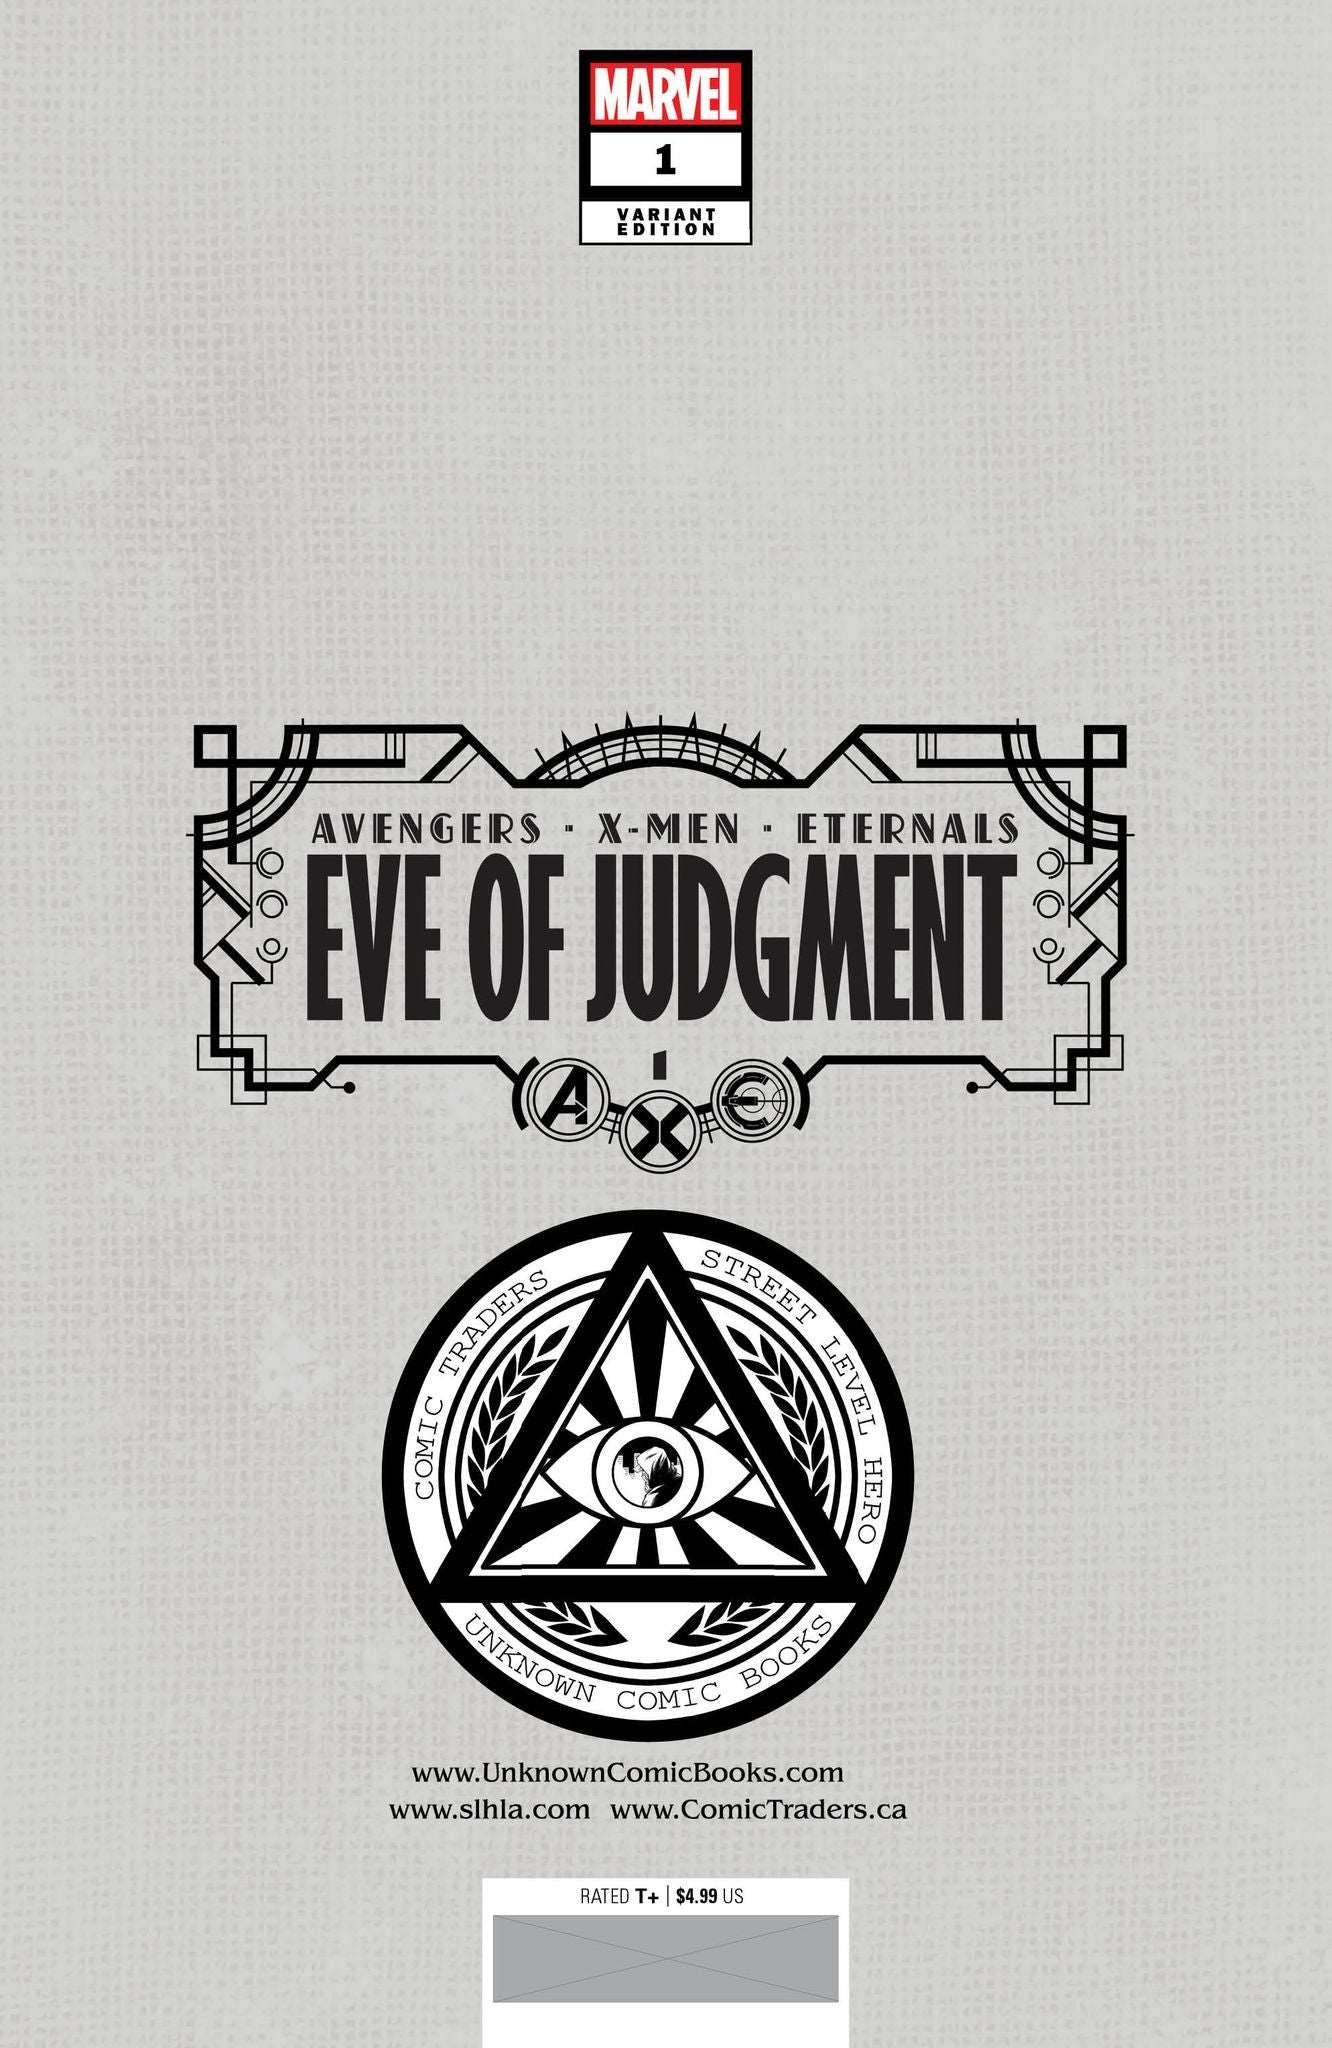 A.X.E.: EVE OF JUDGMENT #1 [AXE] UNKNOWN COMICS DAVID NAKAYAMA HELLFIRE EXCLUSIVE VAR (07/13/2022) **Item(s) may be a preorder and will not ship until or after the street date posted in the title.** A.X.E.: EVE OF JUDGMENT 1 [AXE]MARVEL PRH(W) Kieron Gill